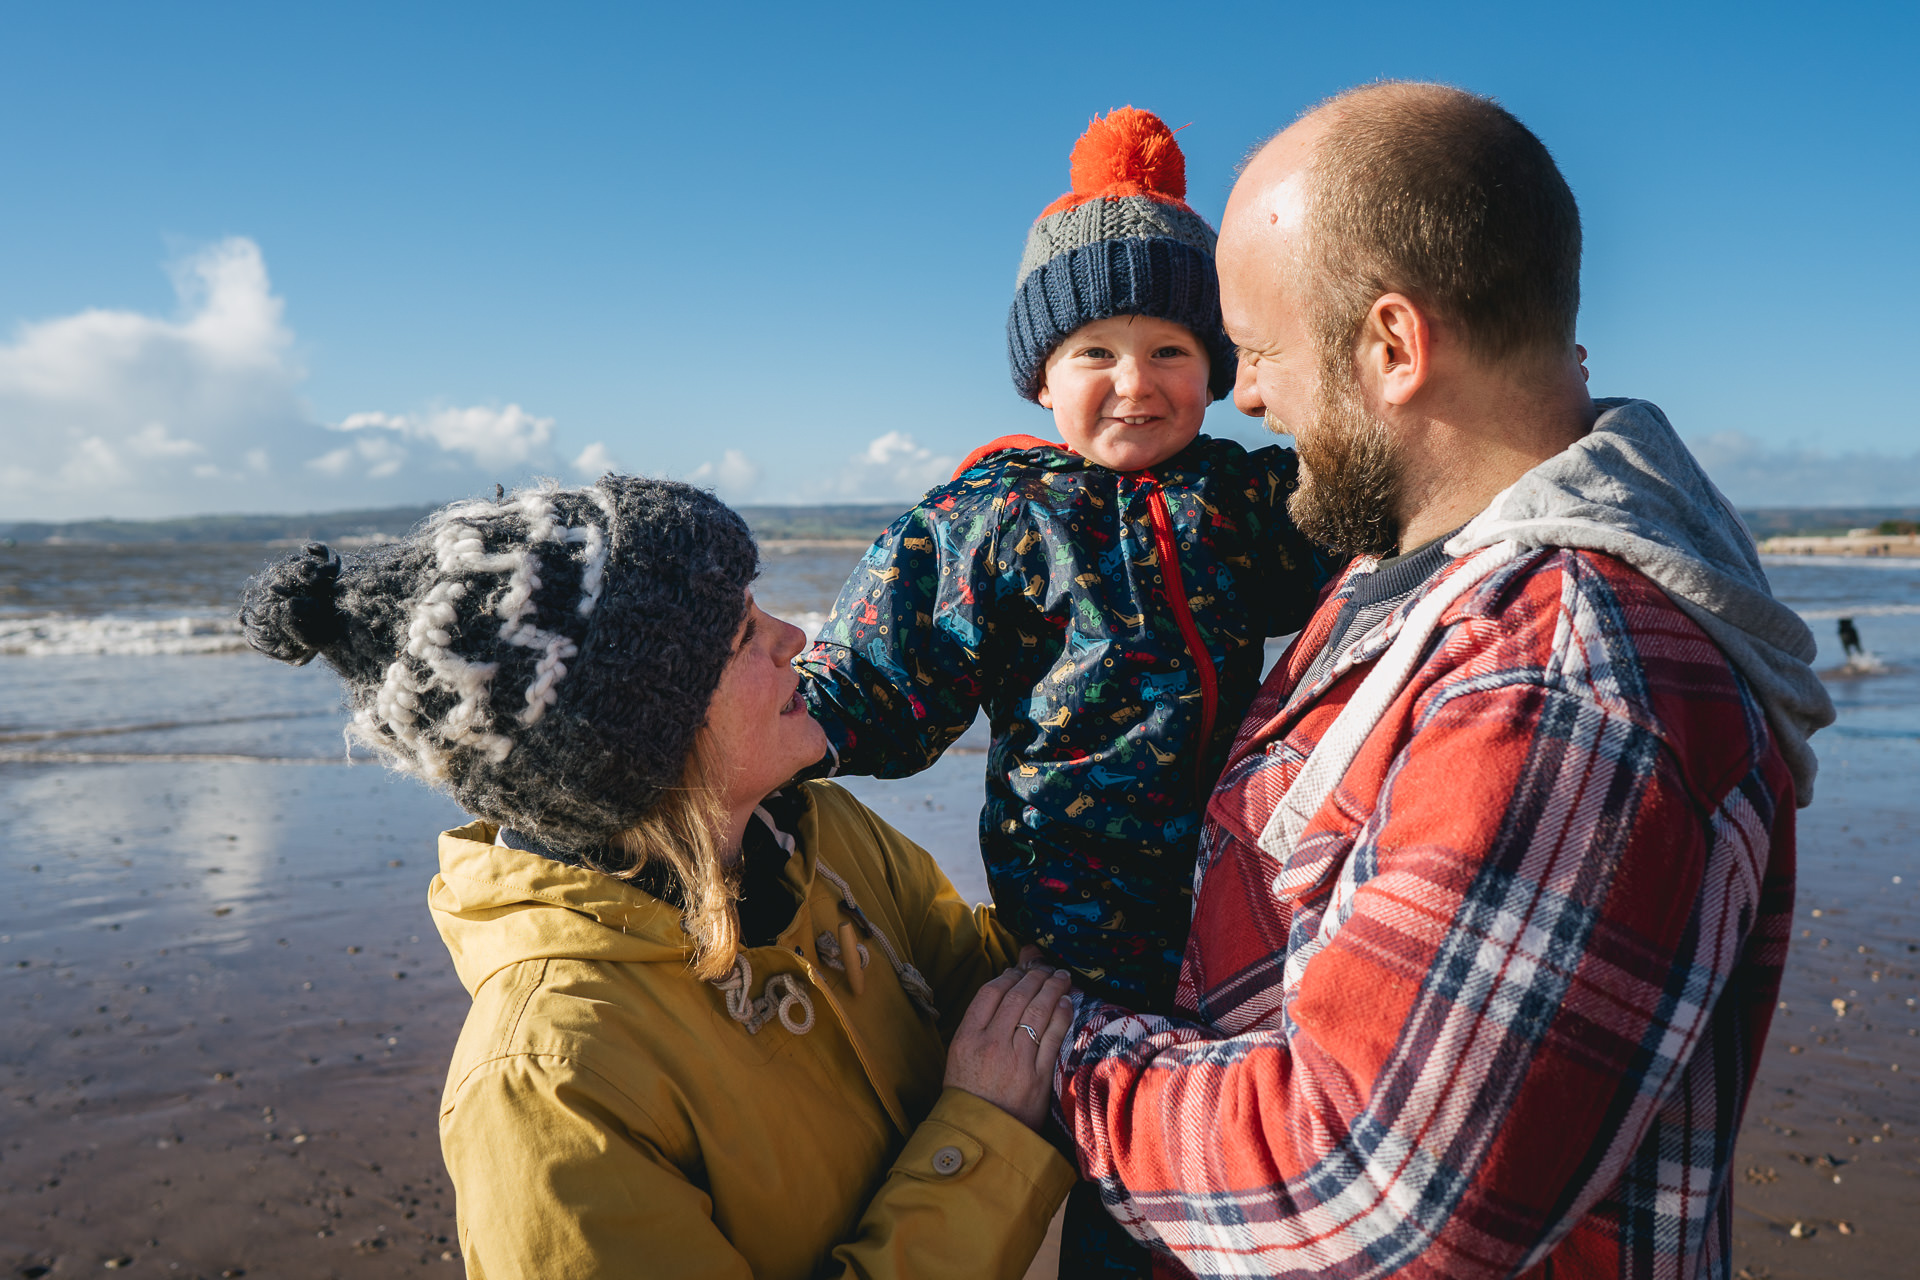 A young child in a bobble hat on a beach, held by his mum and dad